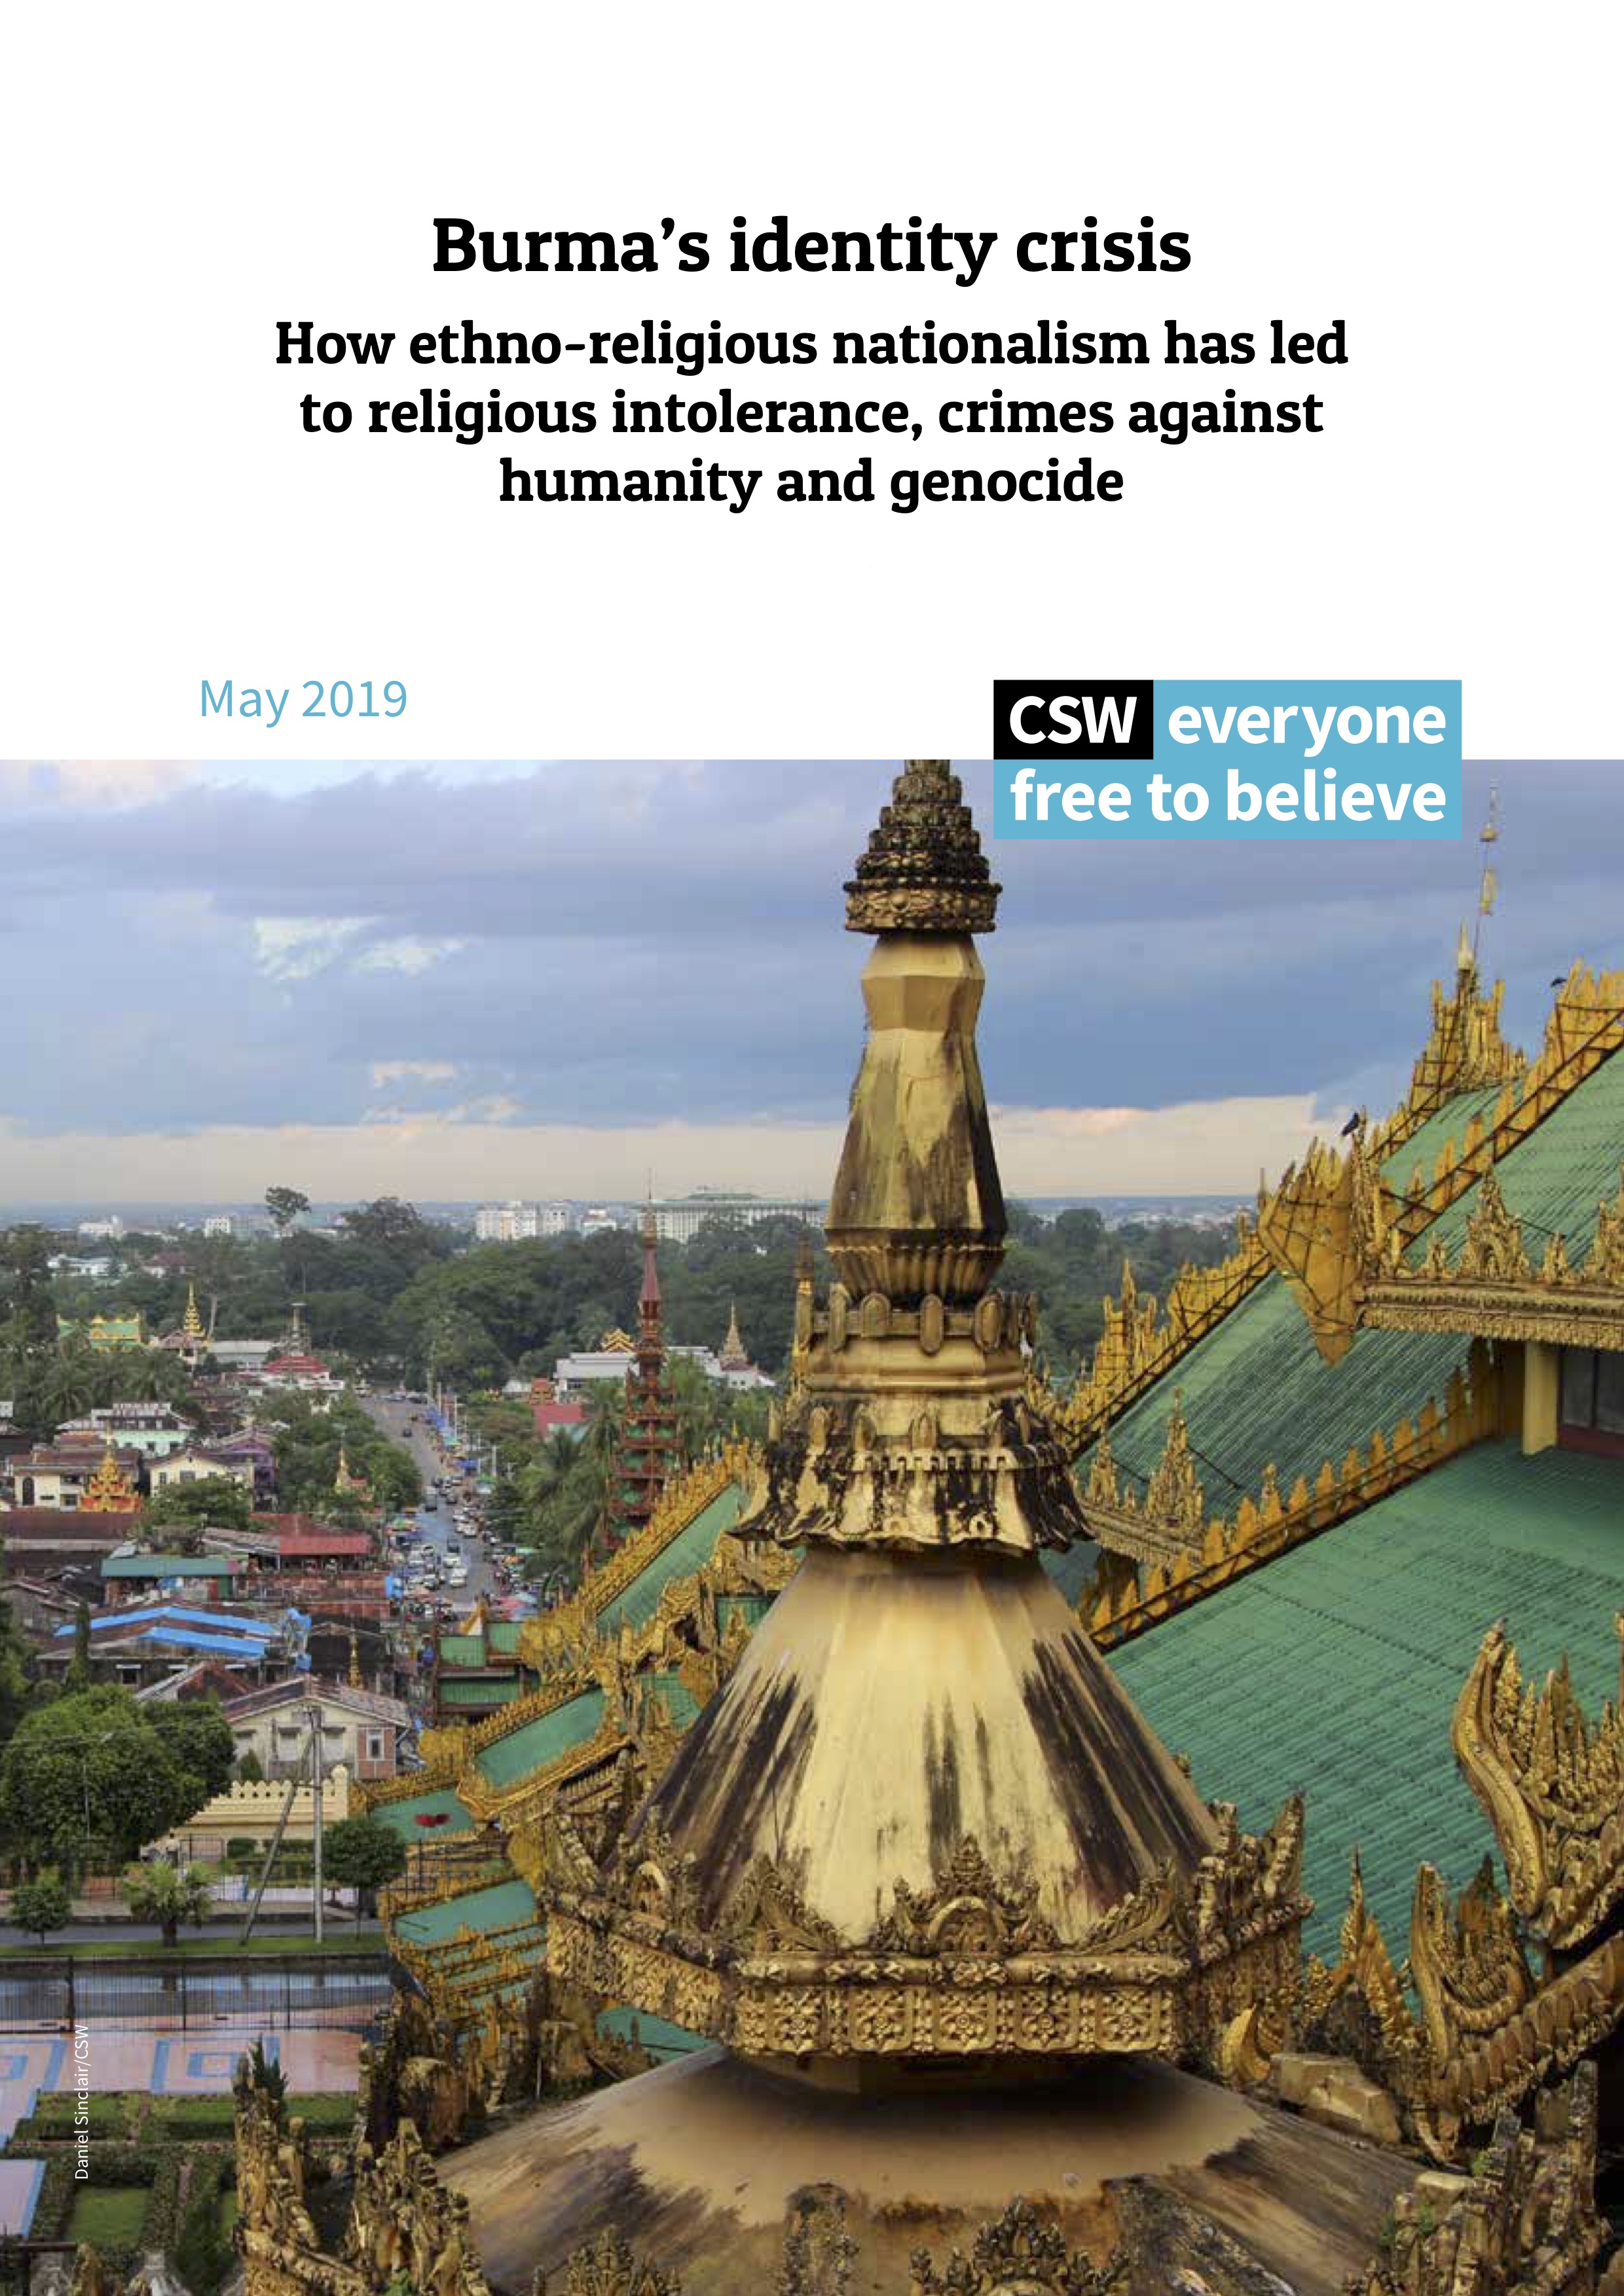 Burma's Identity Crisis: How ethno-religious nationalism has led to religious intolerance, crimes against humanity and genocide. CSW, 2019.